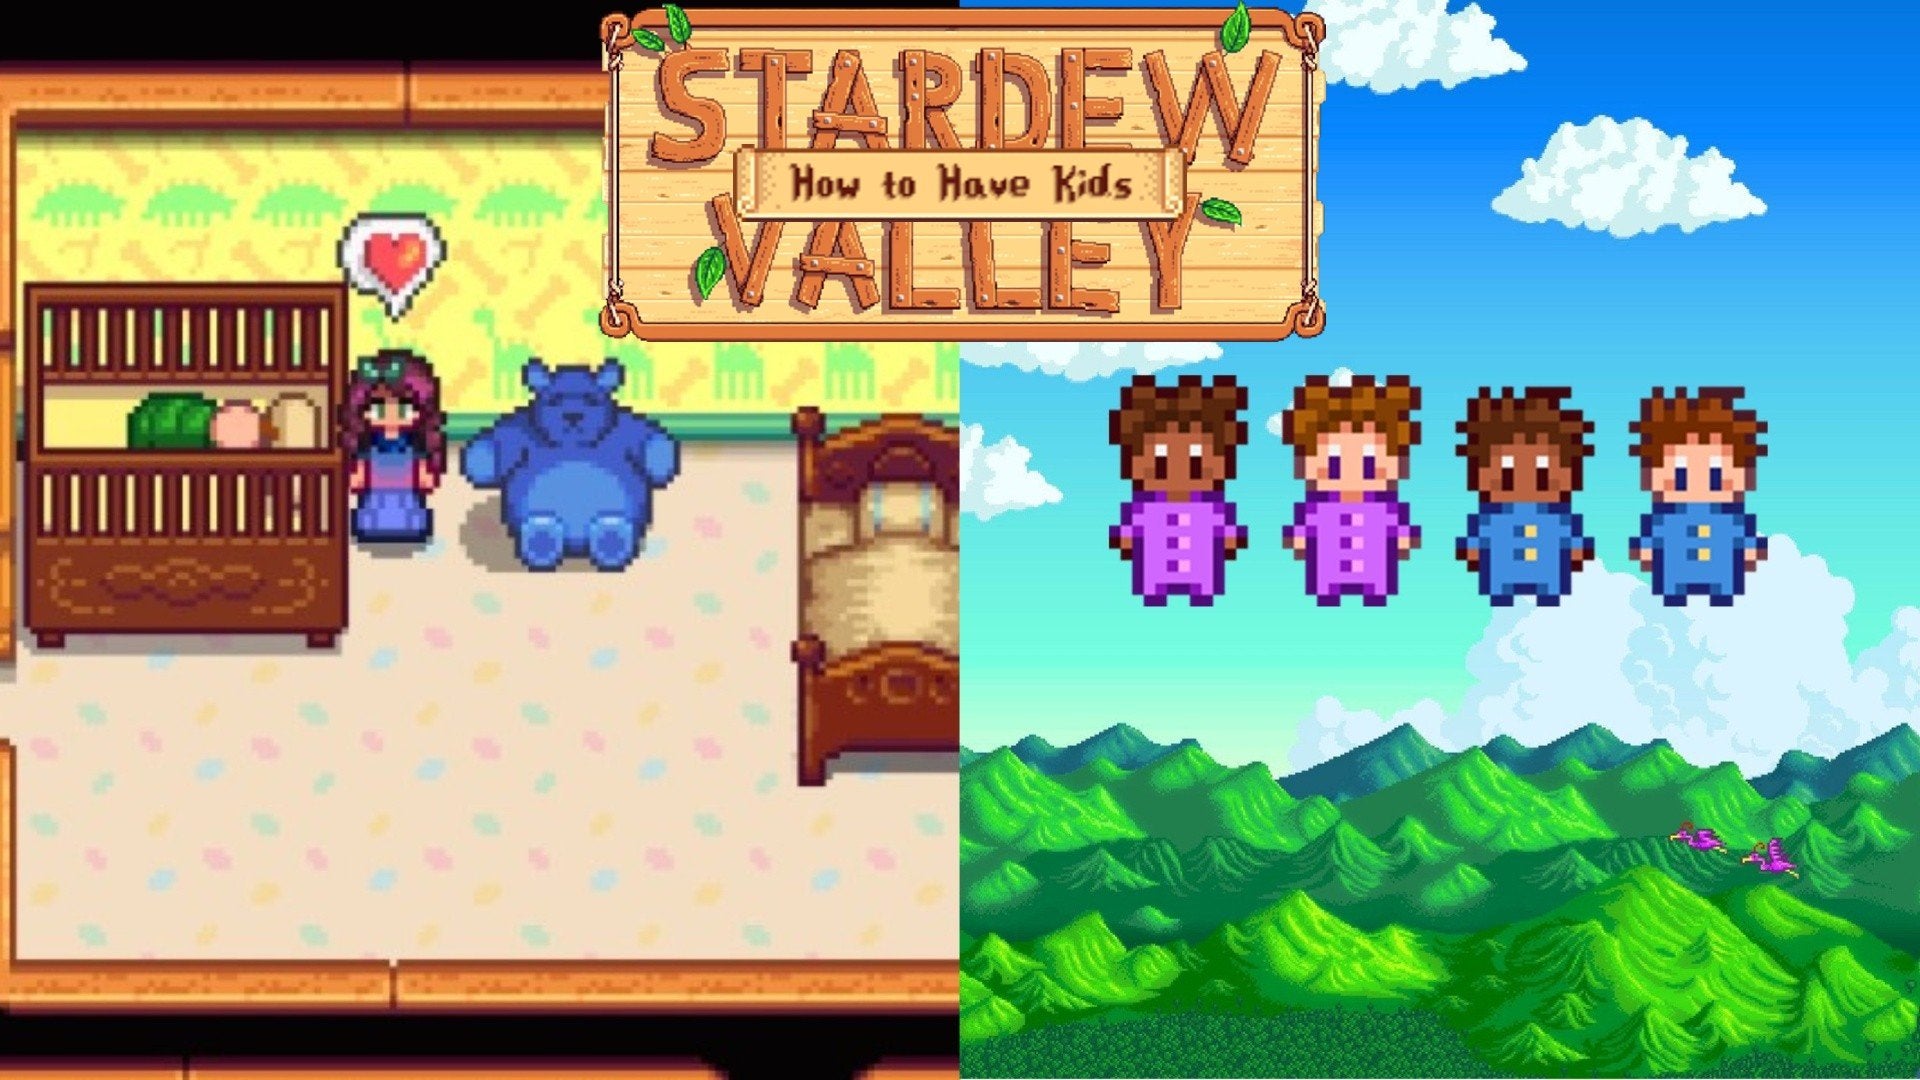 A Stardew Valley player standing next to a sleeping baby in their crib.